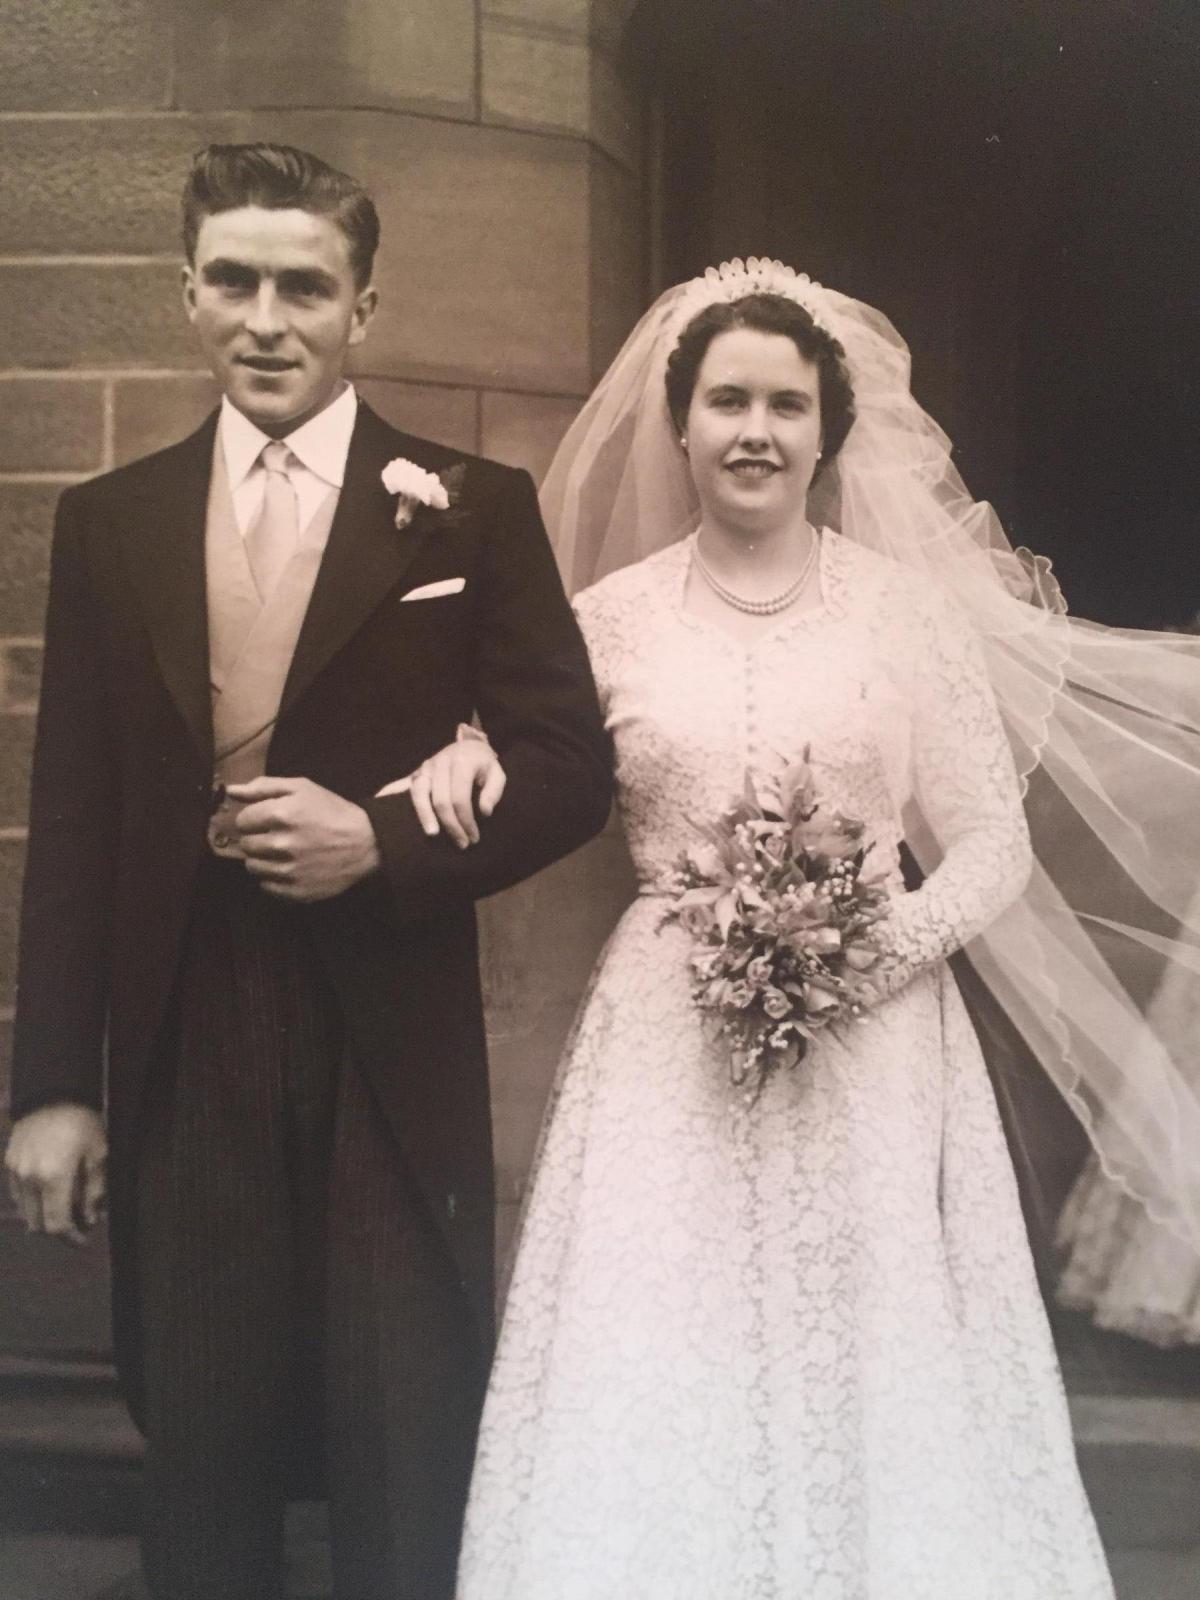 John Armstrong married Moira Hyslop on the 17th of October 1956 at Crichton church in Cumnock. The couple are celebrating 60 years of marriage. Congratulations from all the family.